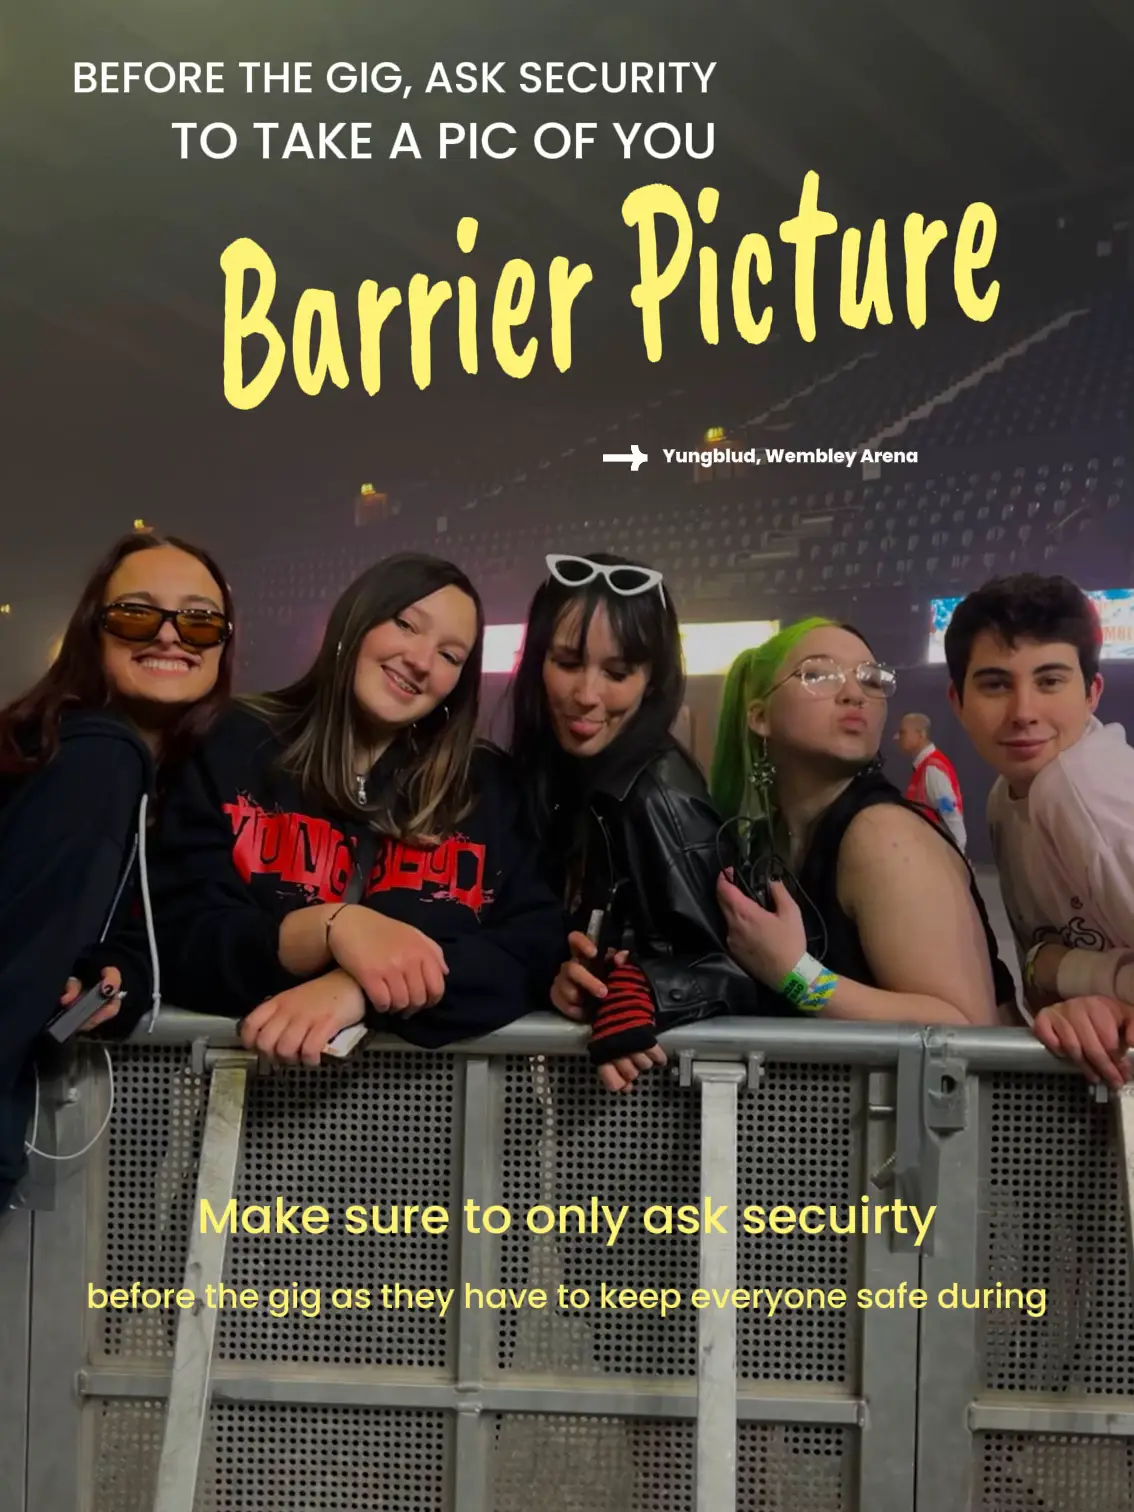  A group of people are standing in front of a barrier